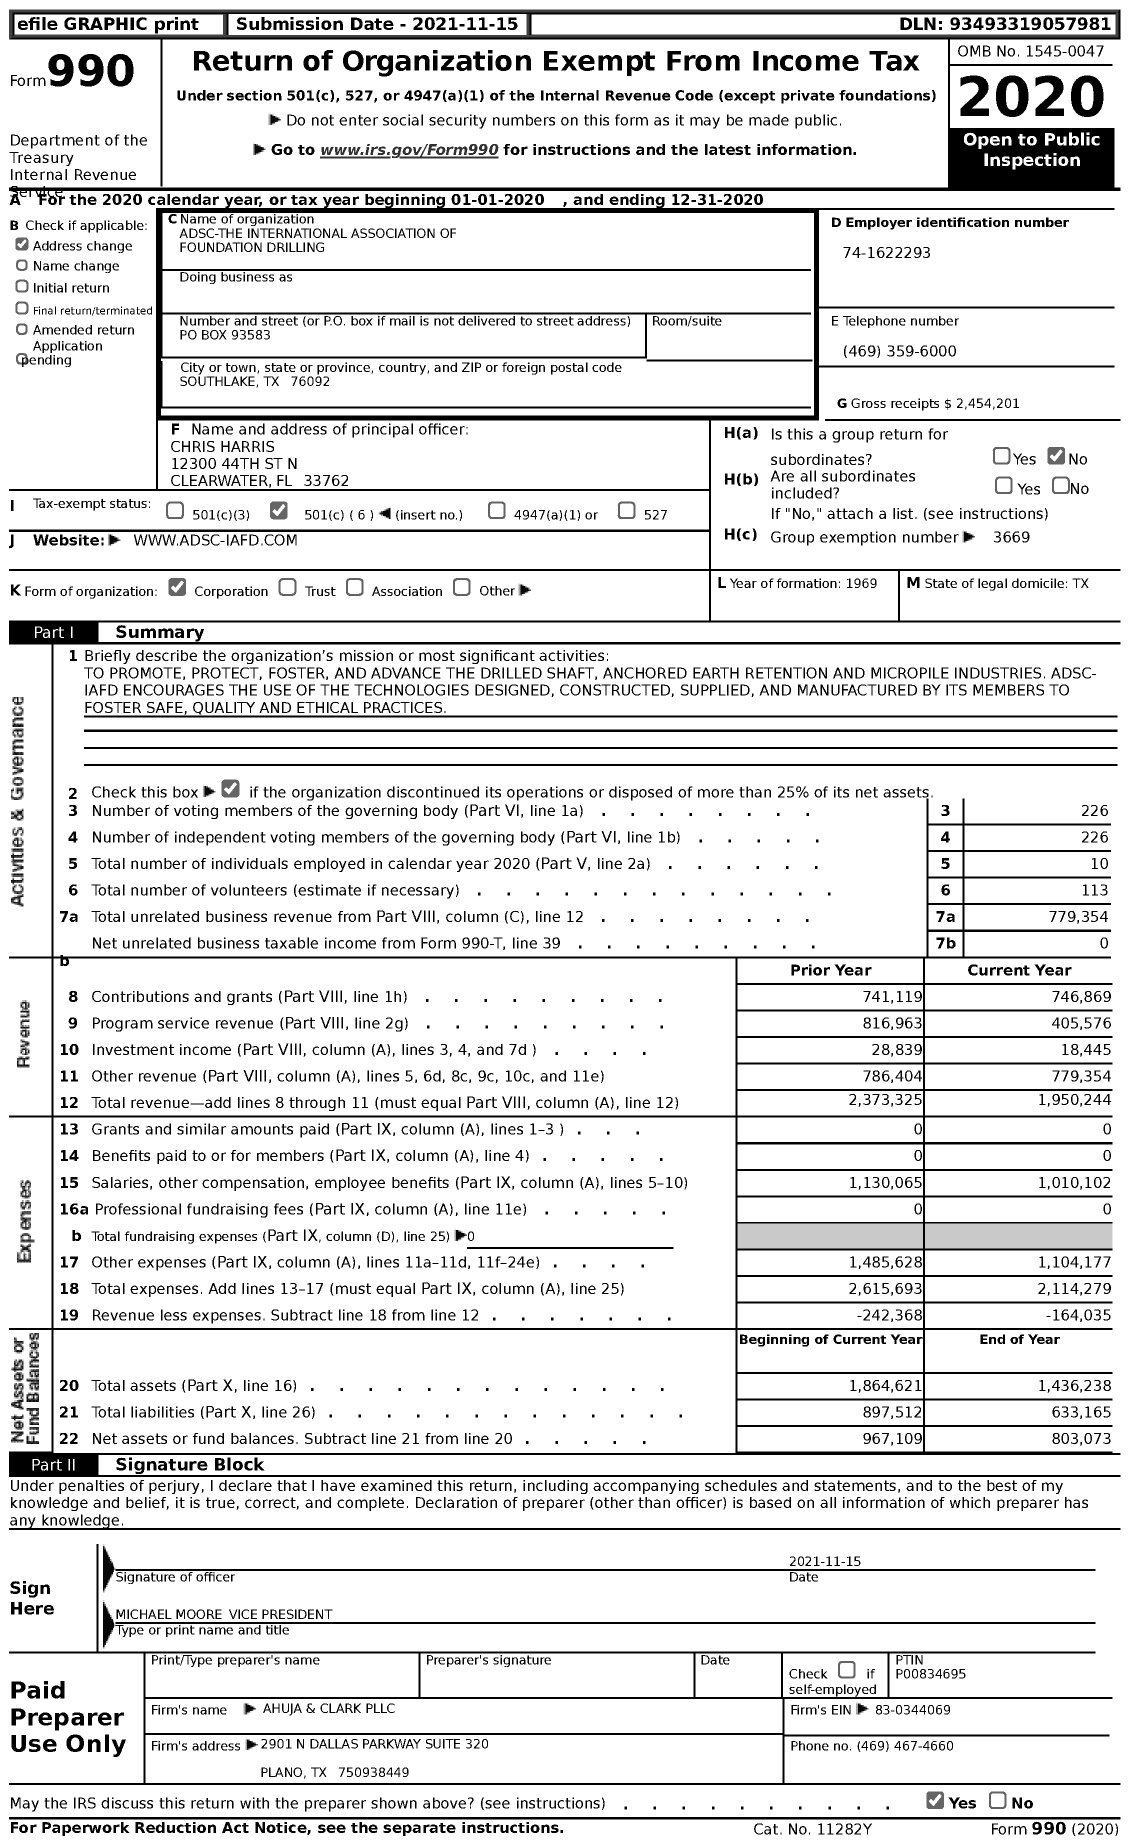 Image of first page of 2020 Form 990 for Adsc the International Association of Foundation Drilling